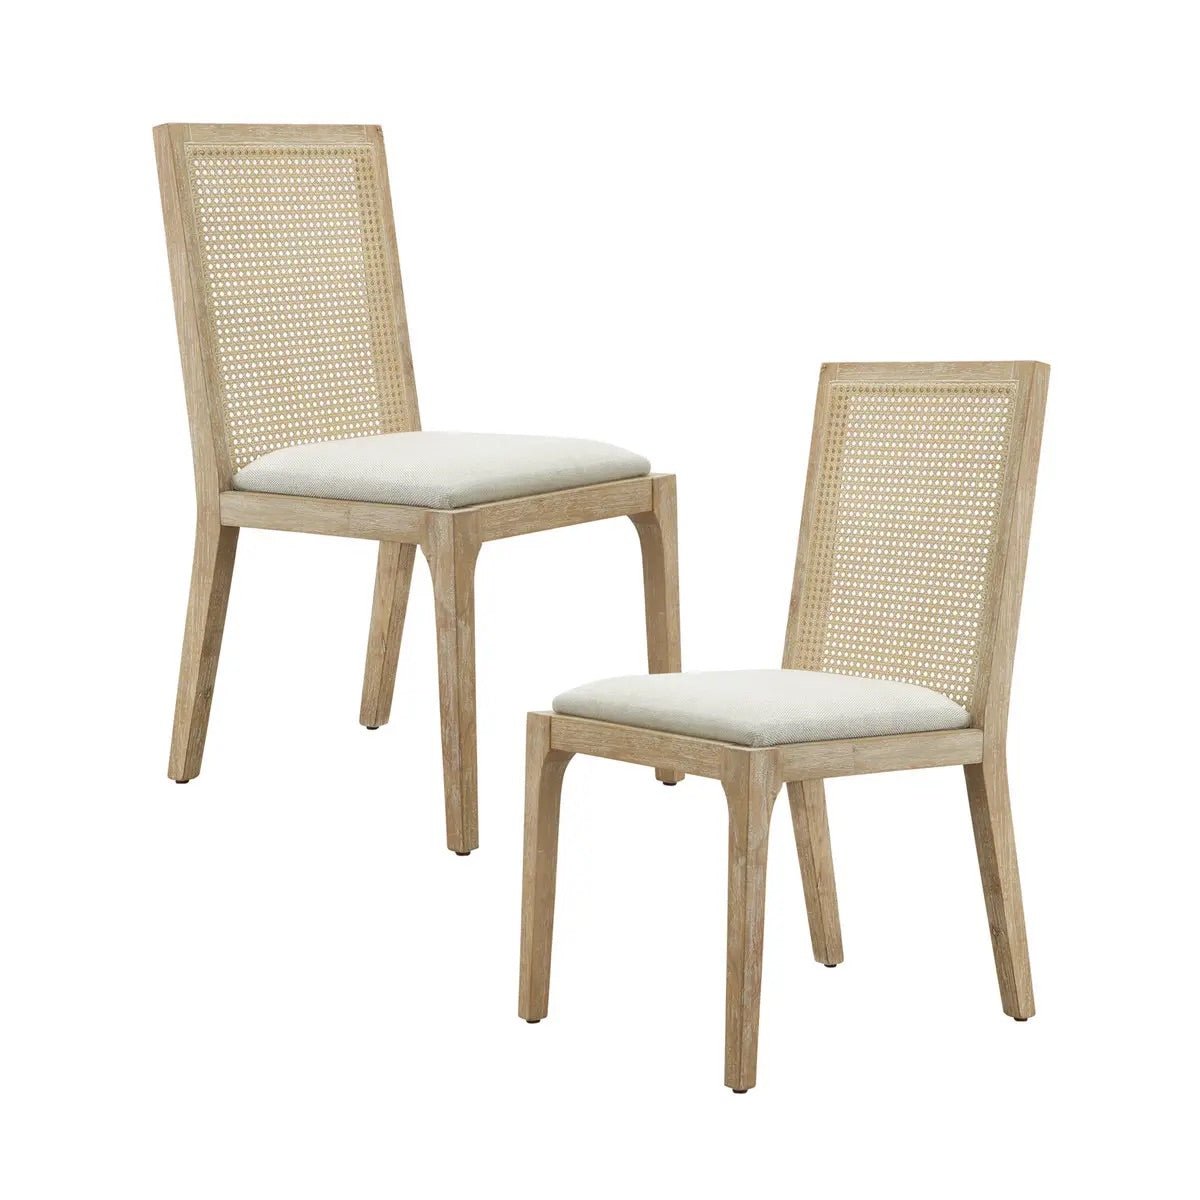 Rustic Cane Back Dining Chair, Upholstered Cream (Set of 2)